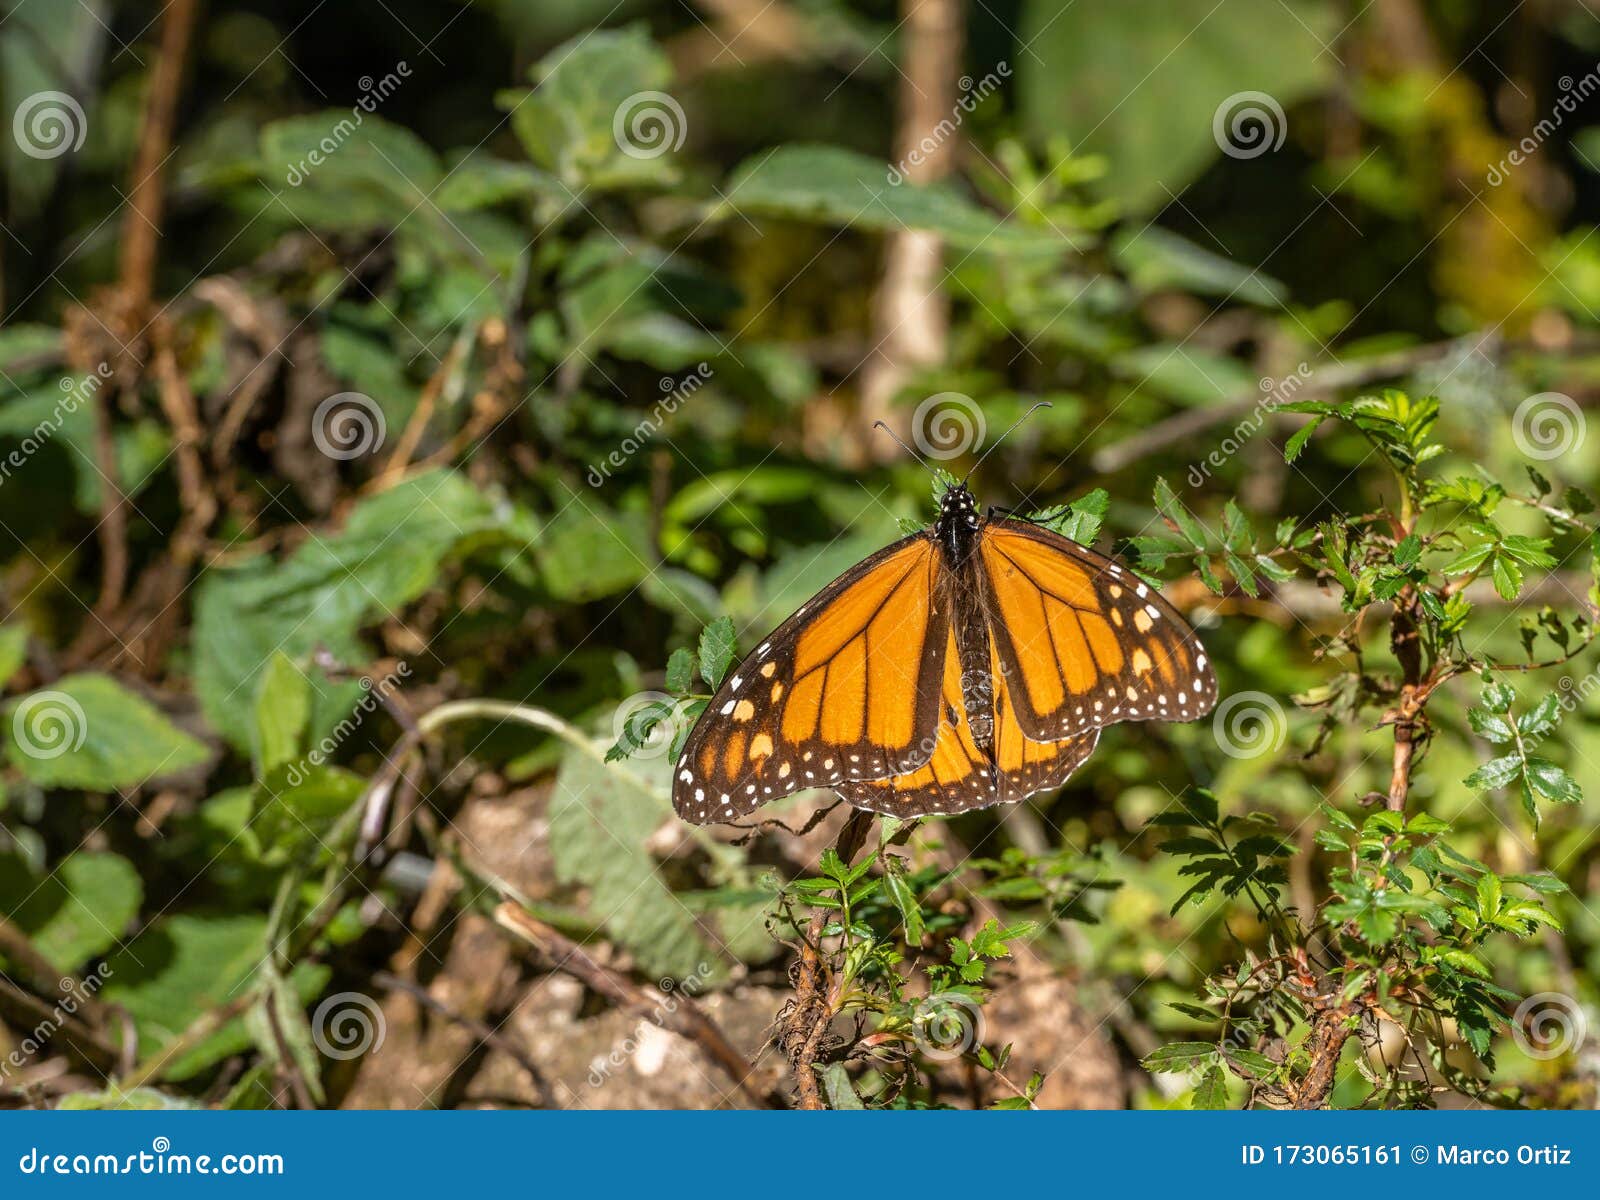 monarch butterfly danaus plexippus sunbathing and perching on a plant in the sanctuary